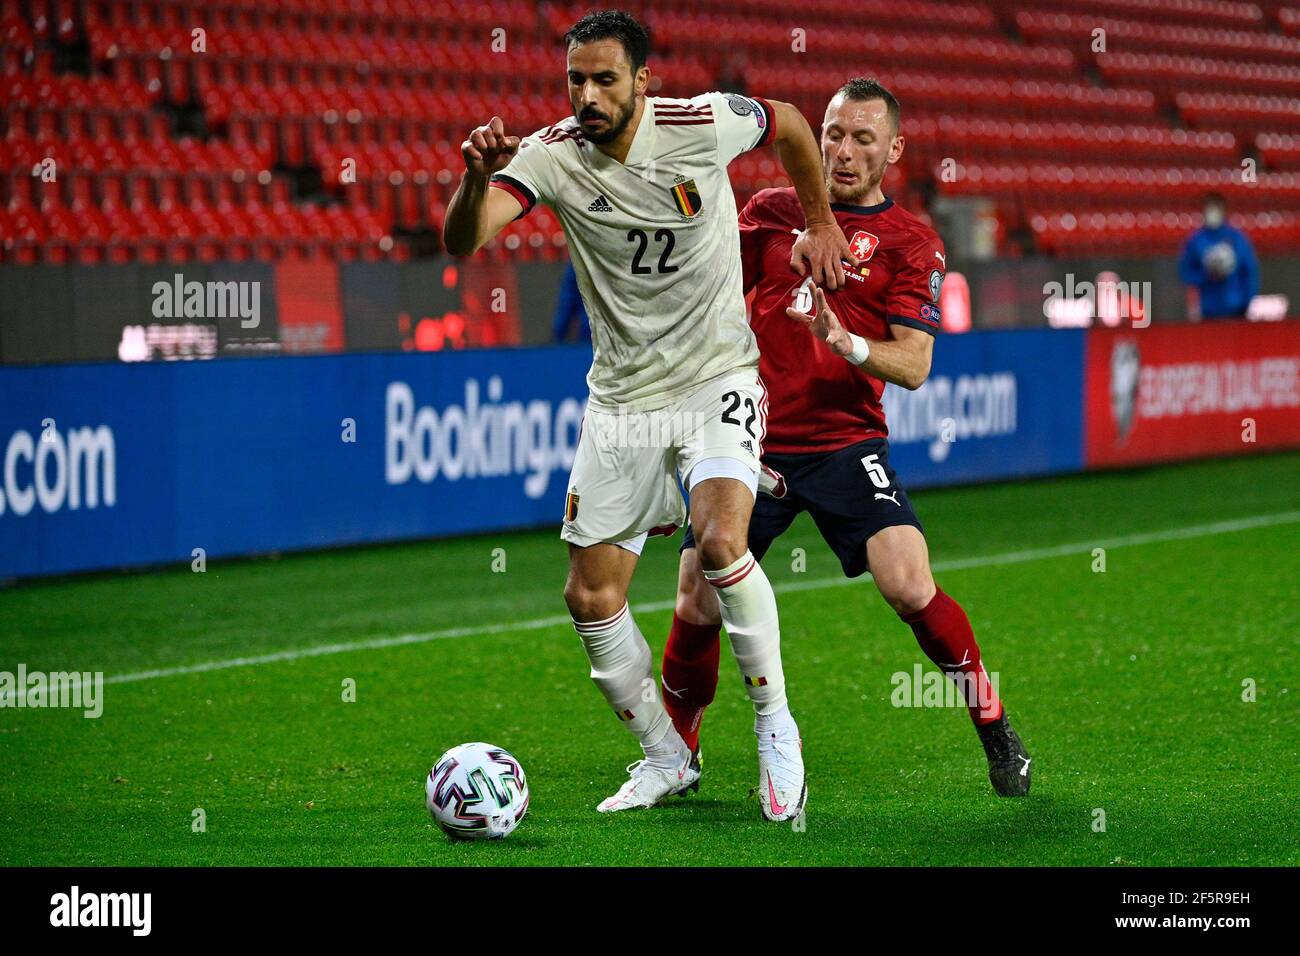 Prague, Czech Republic. 27th Mar, 2021. L-R Nacer Chadli of Belgium and Vladimir Coufal of Czech in action during the World Cup qualifier group E: Czechia vs Belgium in Prague, Czech Republic, on Saturday, March 27, 2021. Credit: Michal Kamaryt/CTK Photo/Alamy Live News Stock Photo